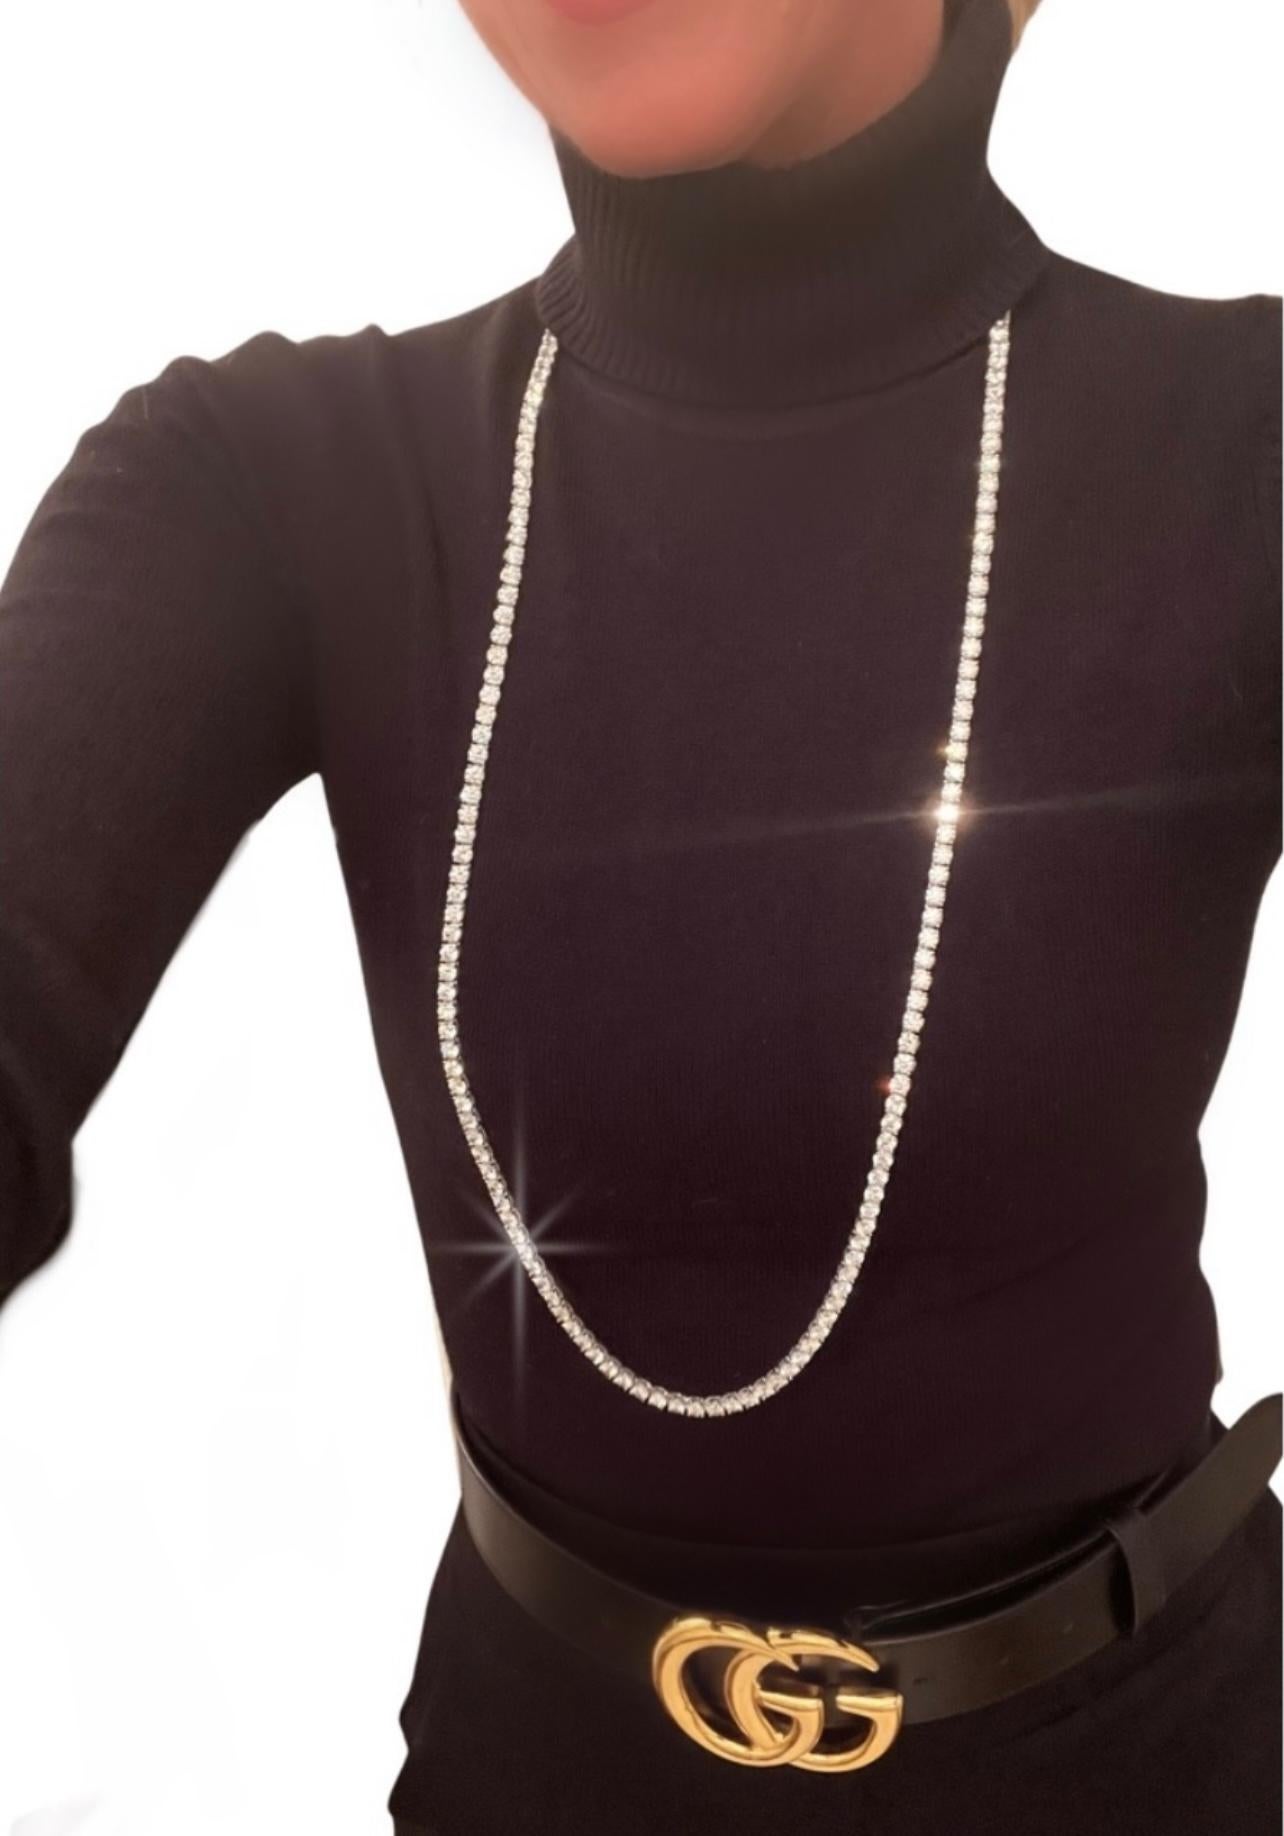 When only the best will do, 169 diamonds make up this outstanding 84.53 cttw. straight line necklace.  Thirty six inches of carefully selected diamonds matching in size, color and clarity.  Each diamond averages .50 carat and 4.89 mm.  They are G-H